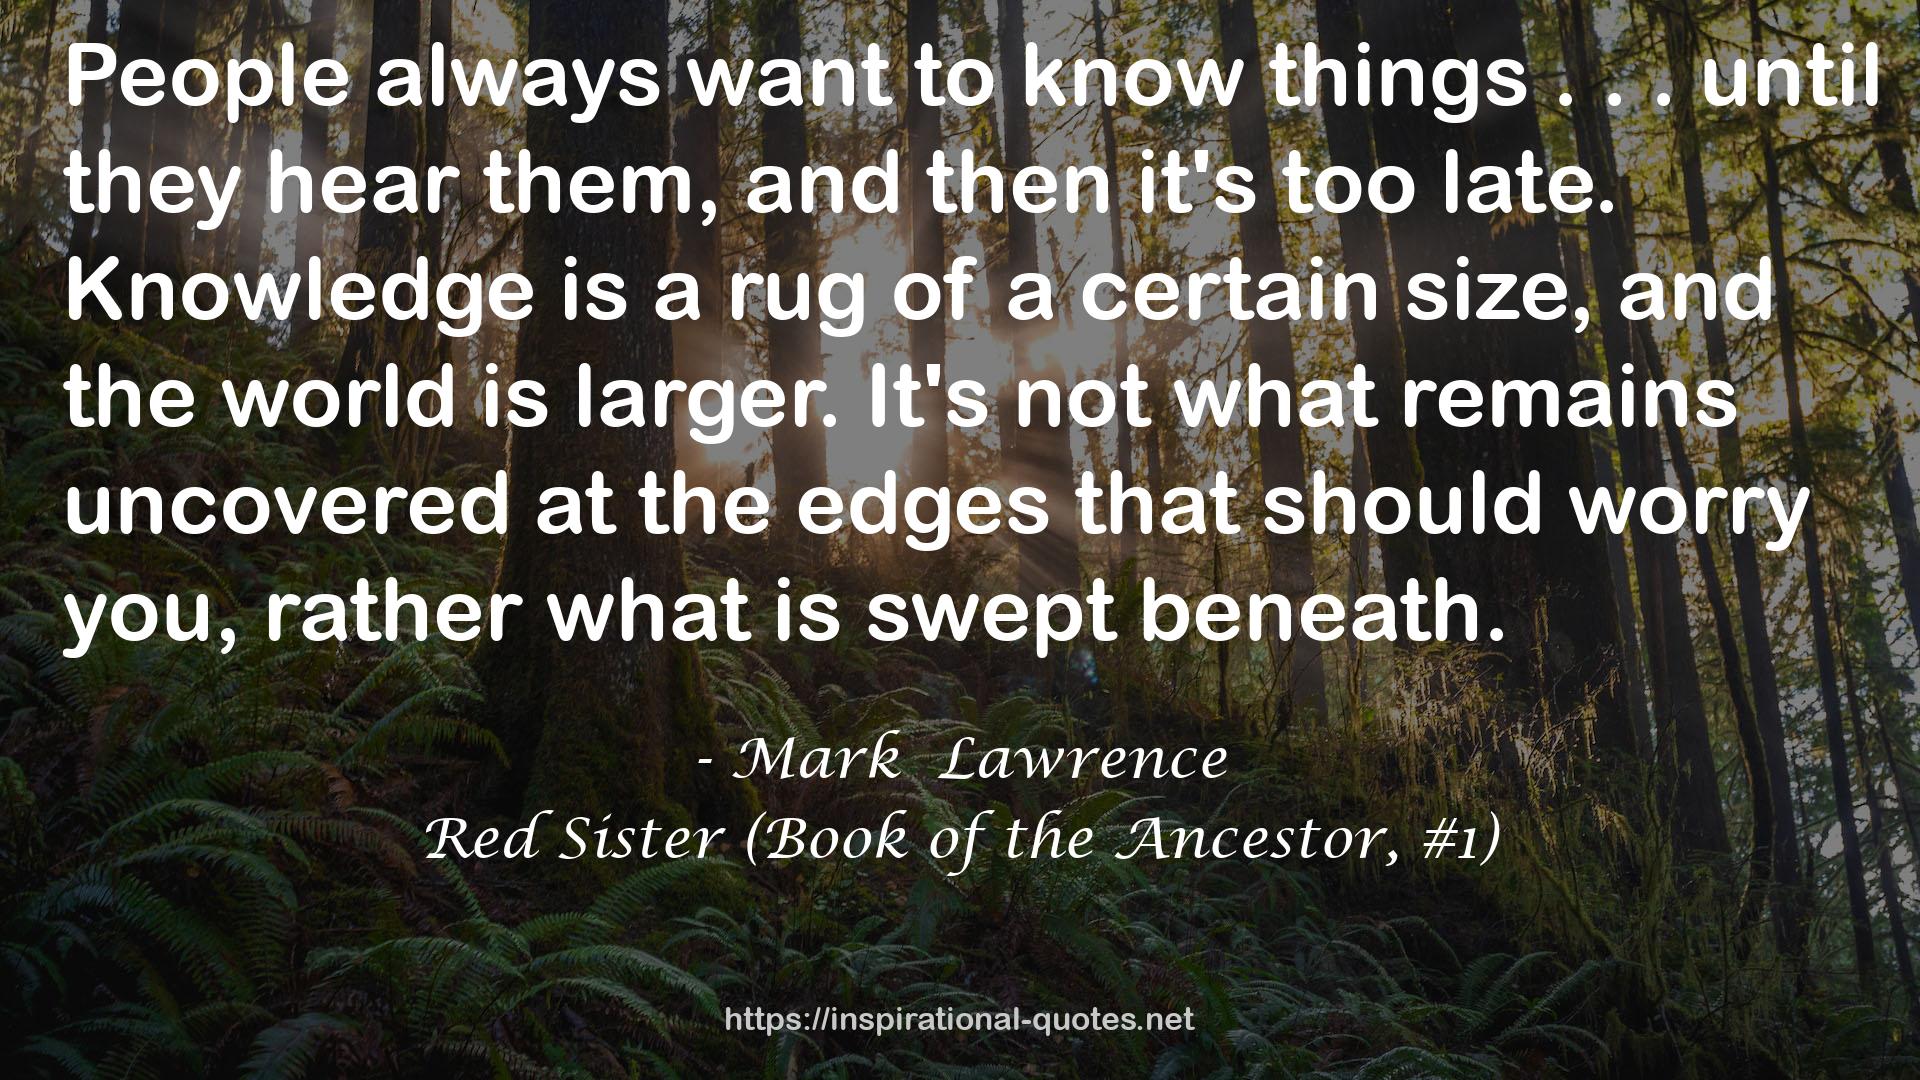 Red Sister (Book of the Ancestor, #1) QUOTES